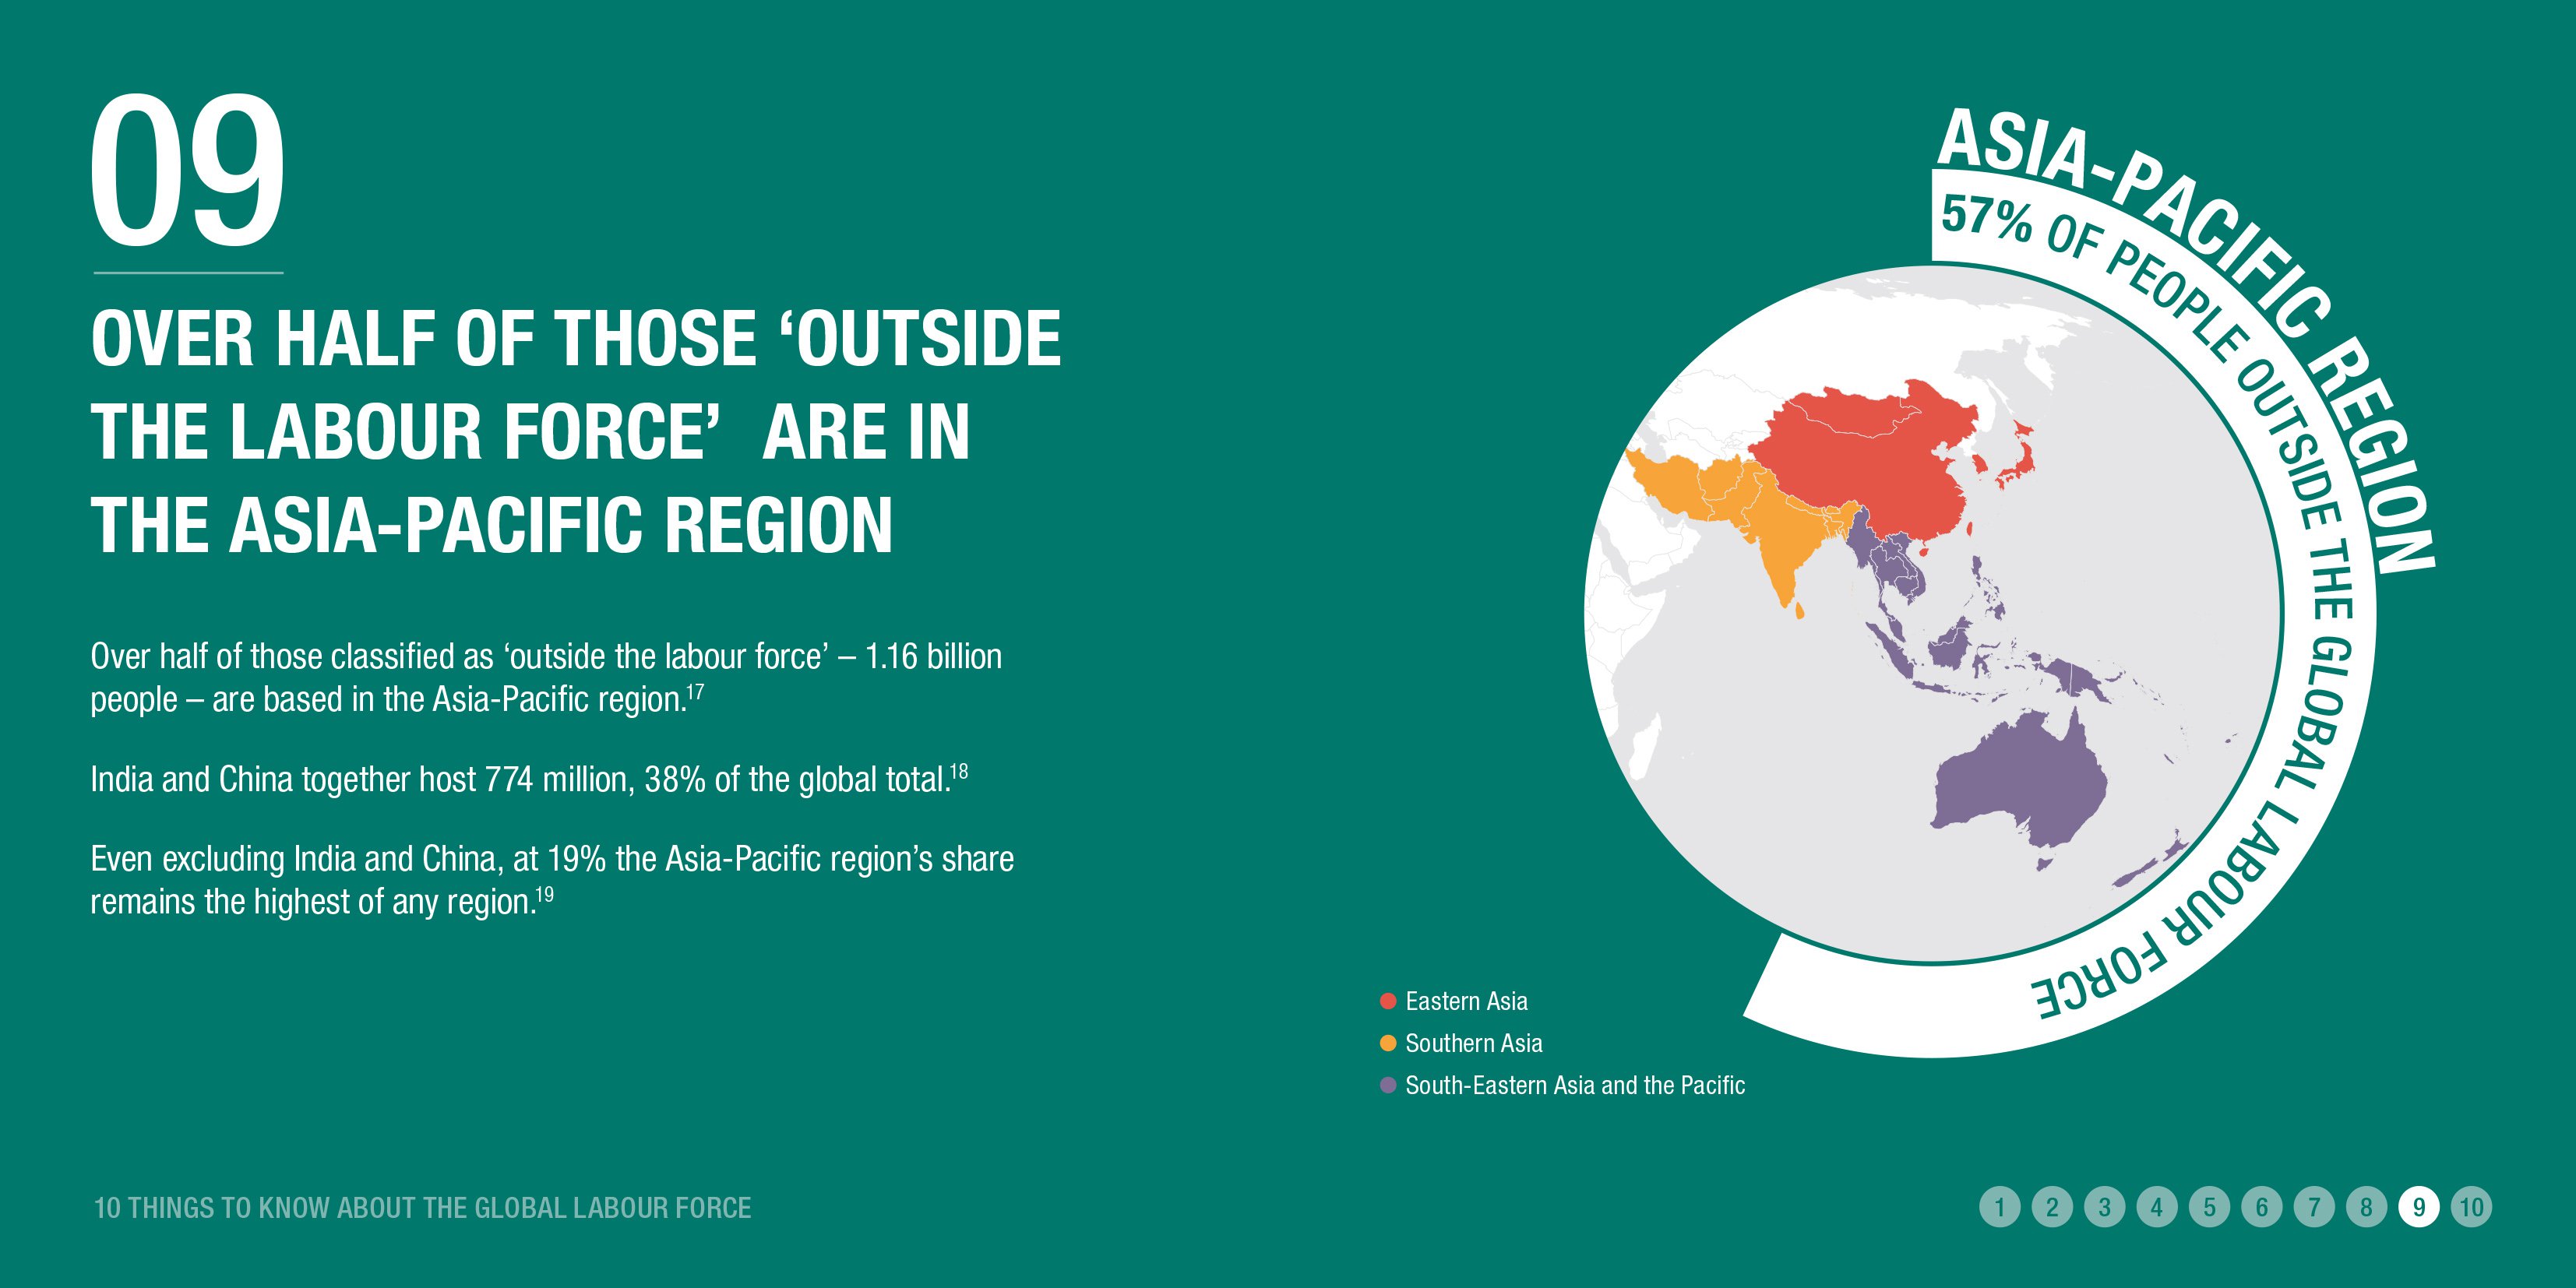 Over half of those 'outside the labour force' are in the Asia-Pacific region